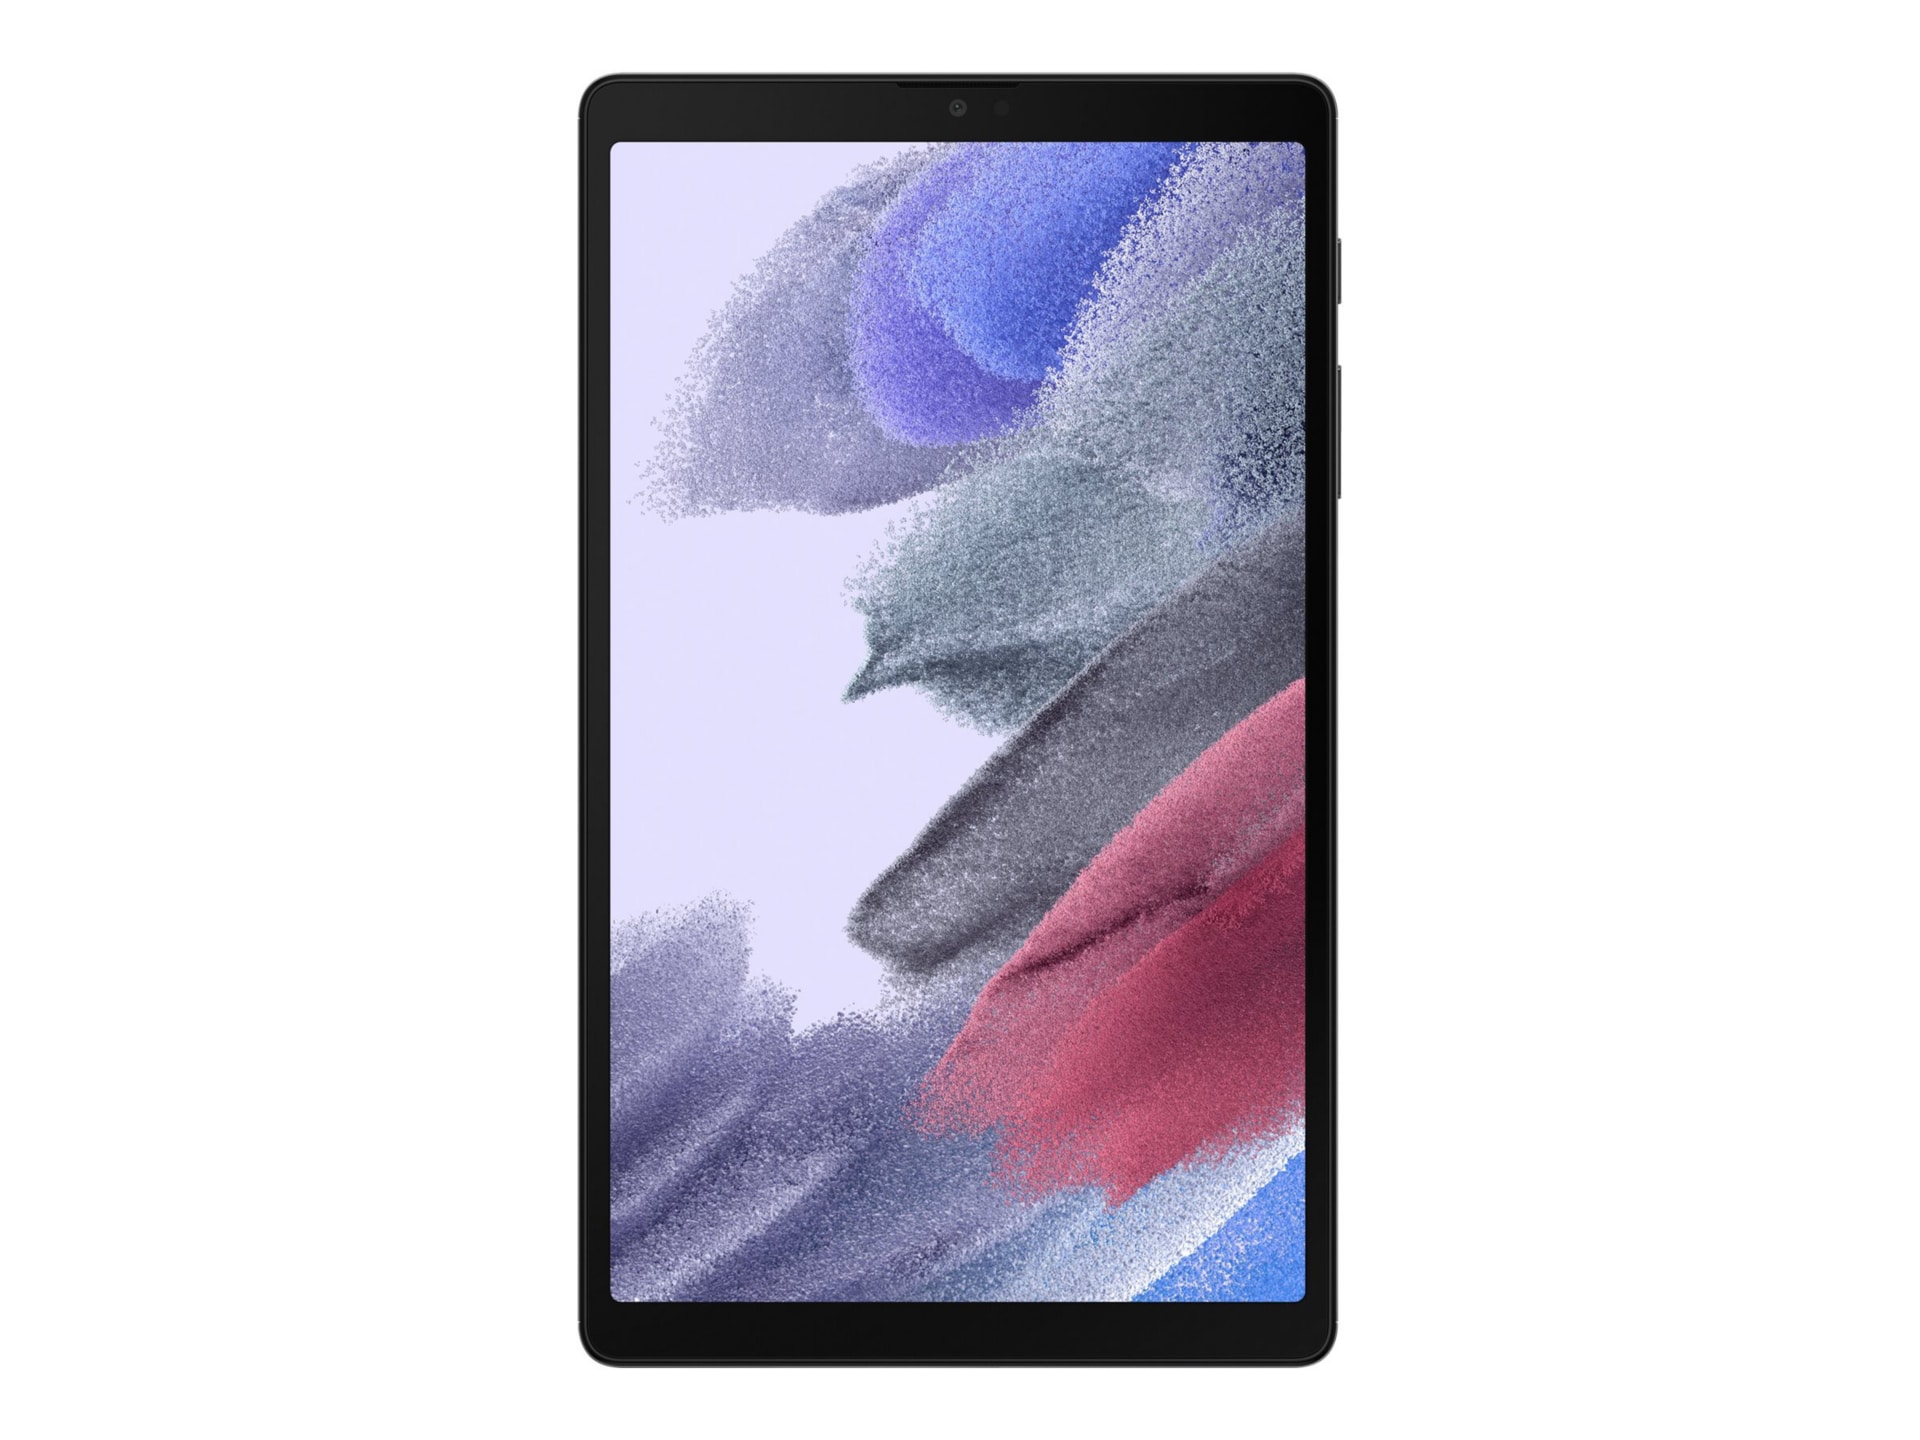 Samsung Galaxy Tab A7 Lite - tablet - Android - 32 GB - 8.7" - 4G - T-Mobile